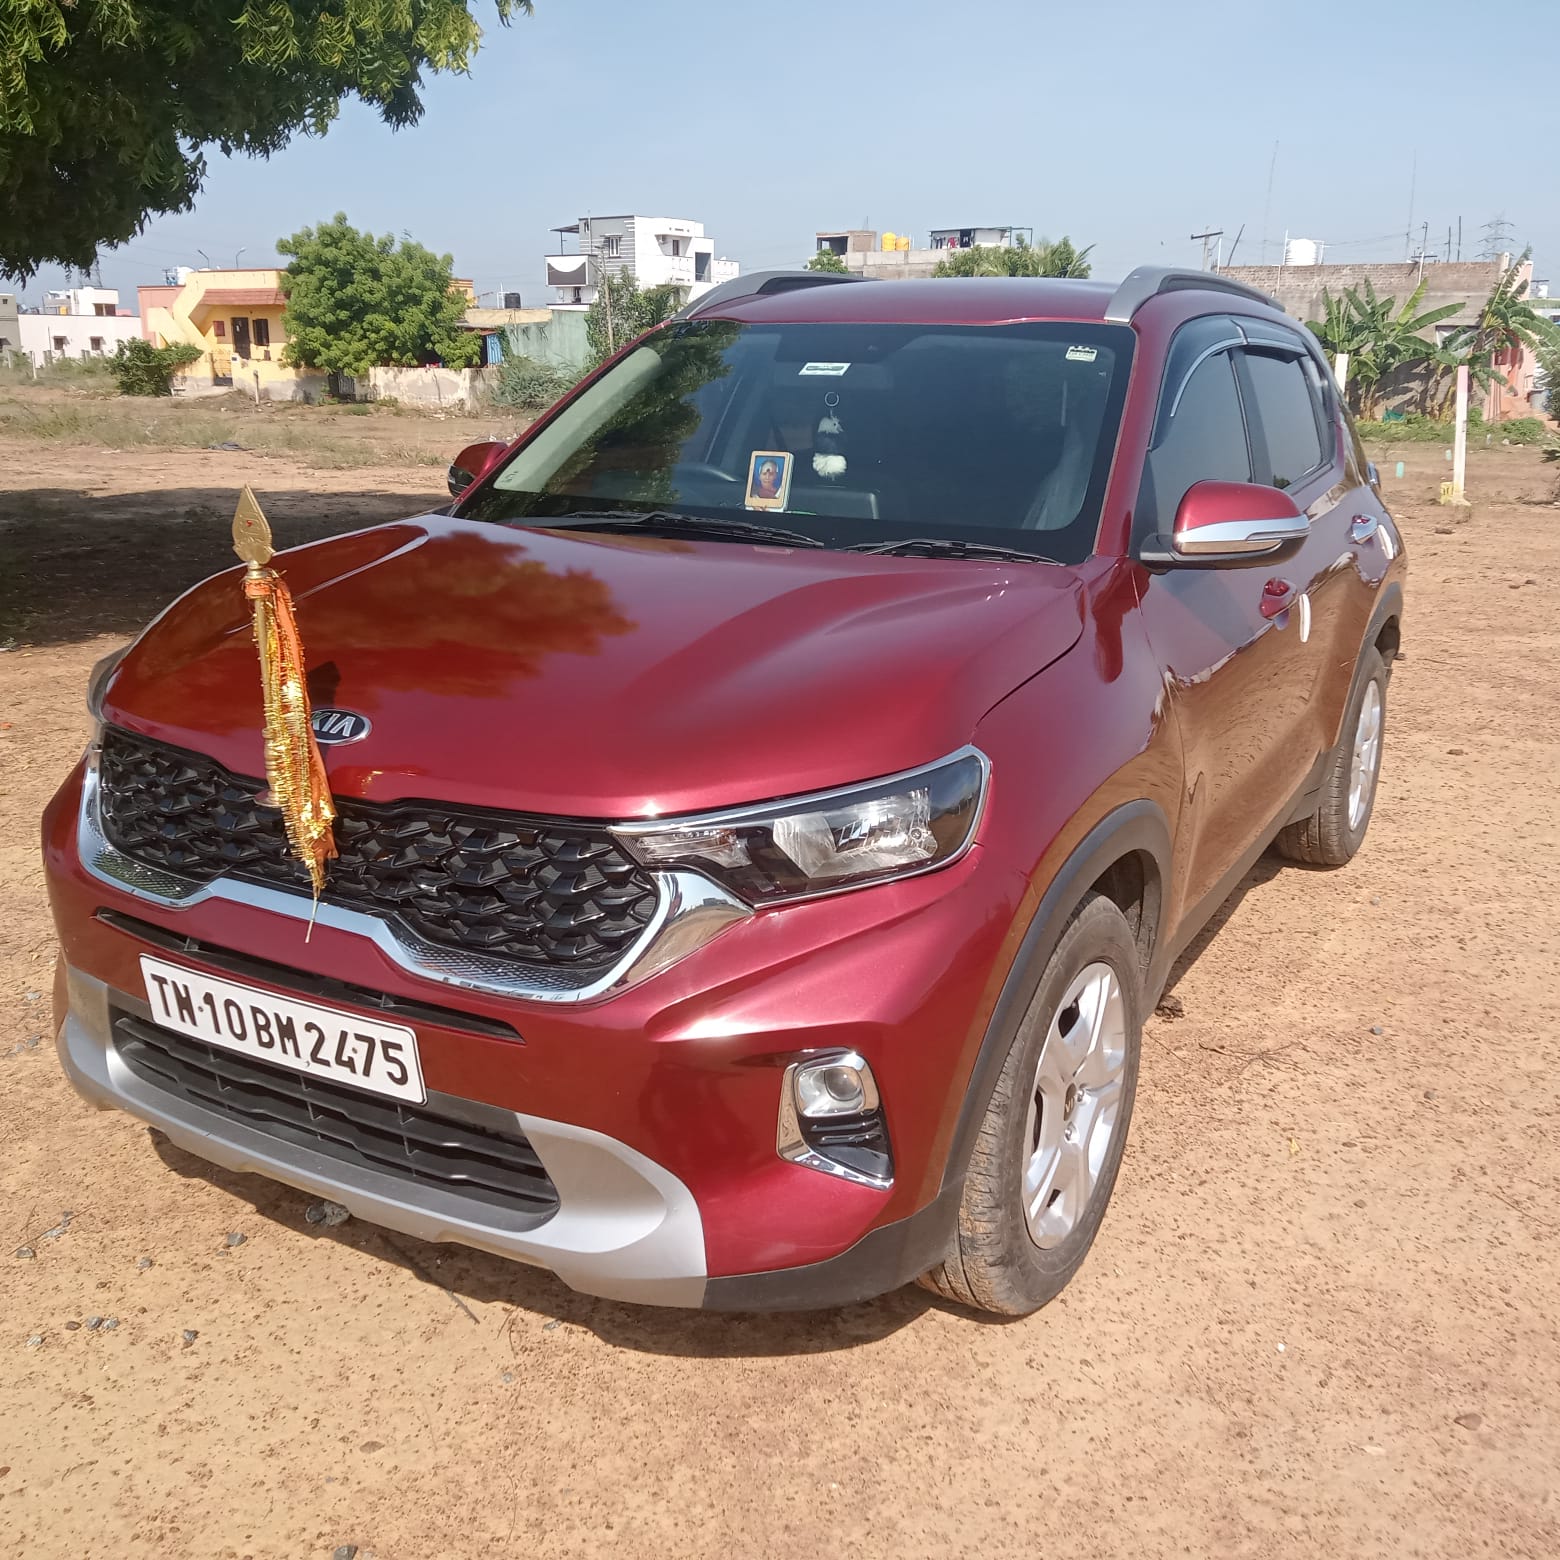 4764-for-sale-Kia-Sonnet-Petrol-Second-Owner-2021-TN-registered-rs-775000